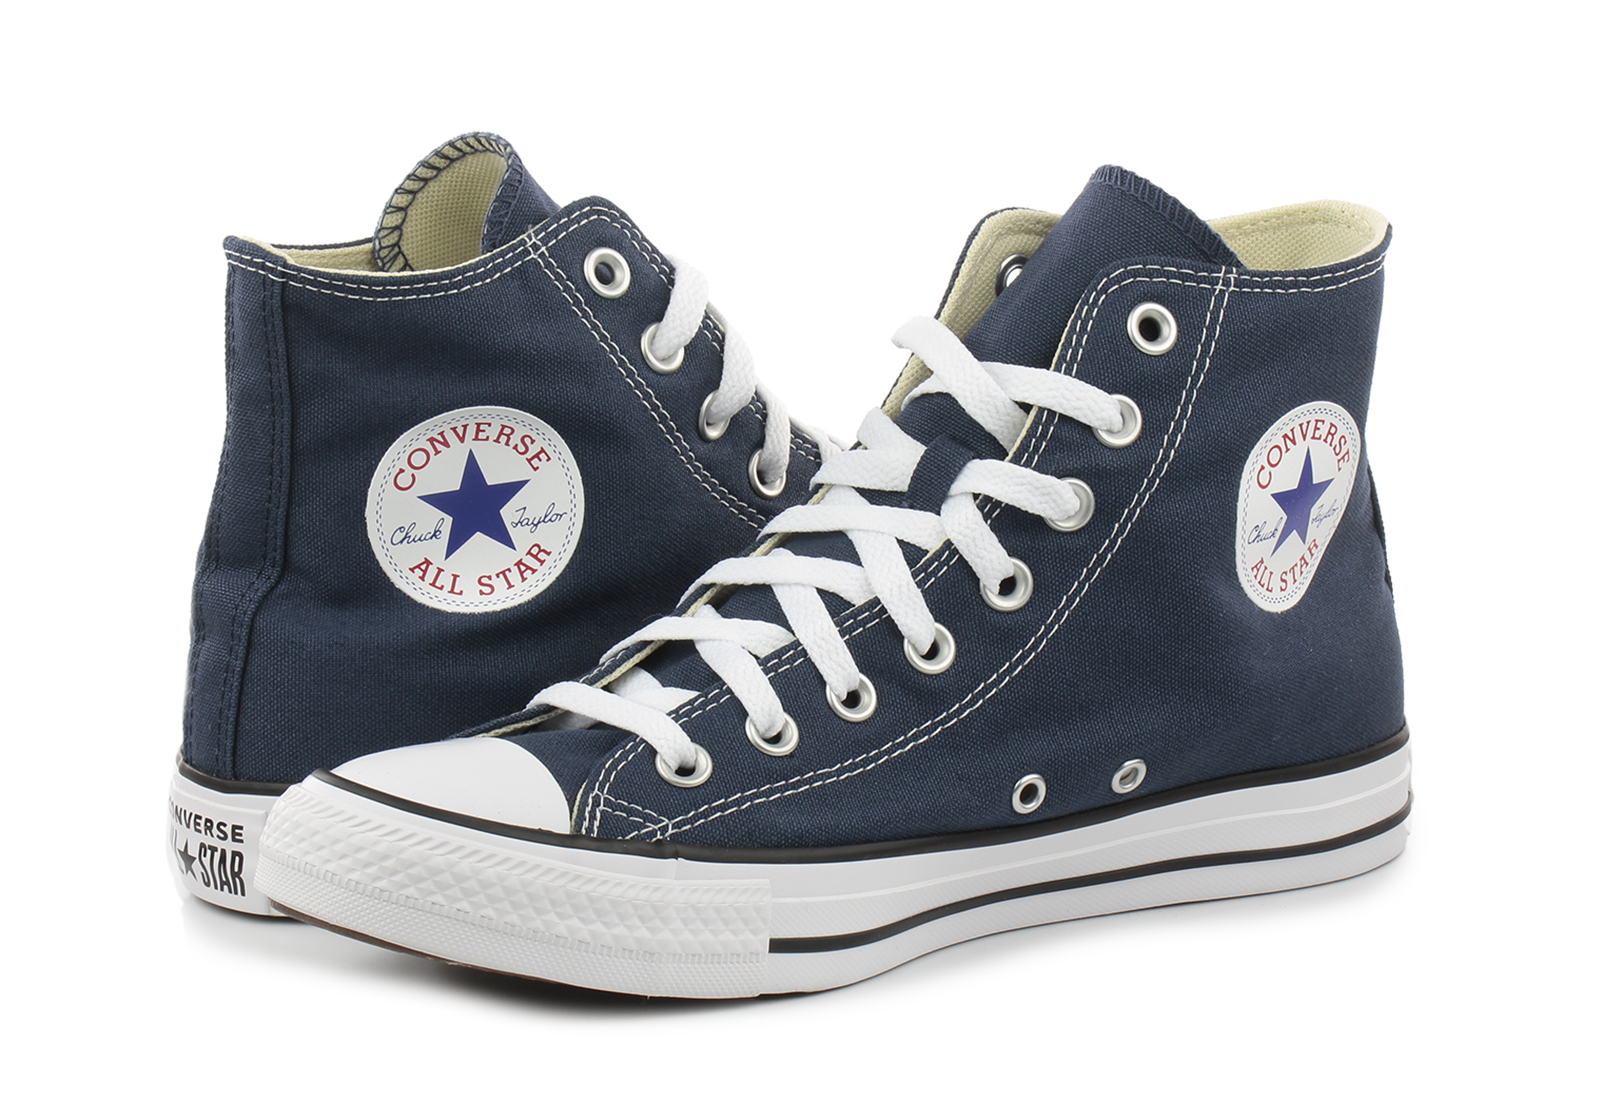 hjort Soak Garanti Converse High trainers - Chuck Taylor All Star - M9622C - Online shop for  sneakers, shoes and boots